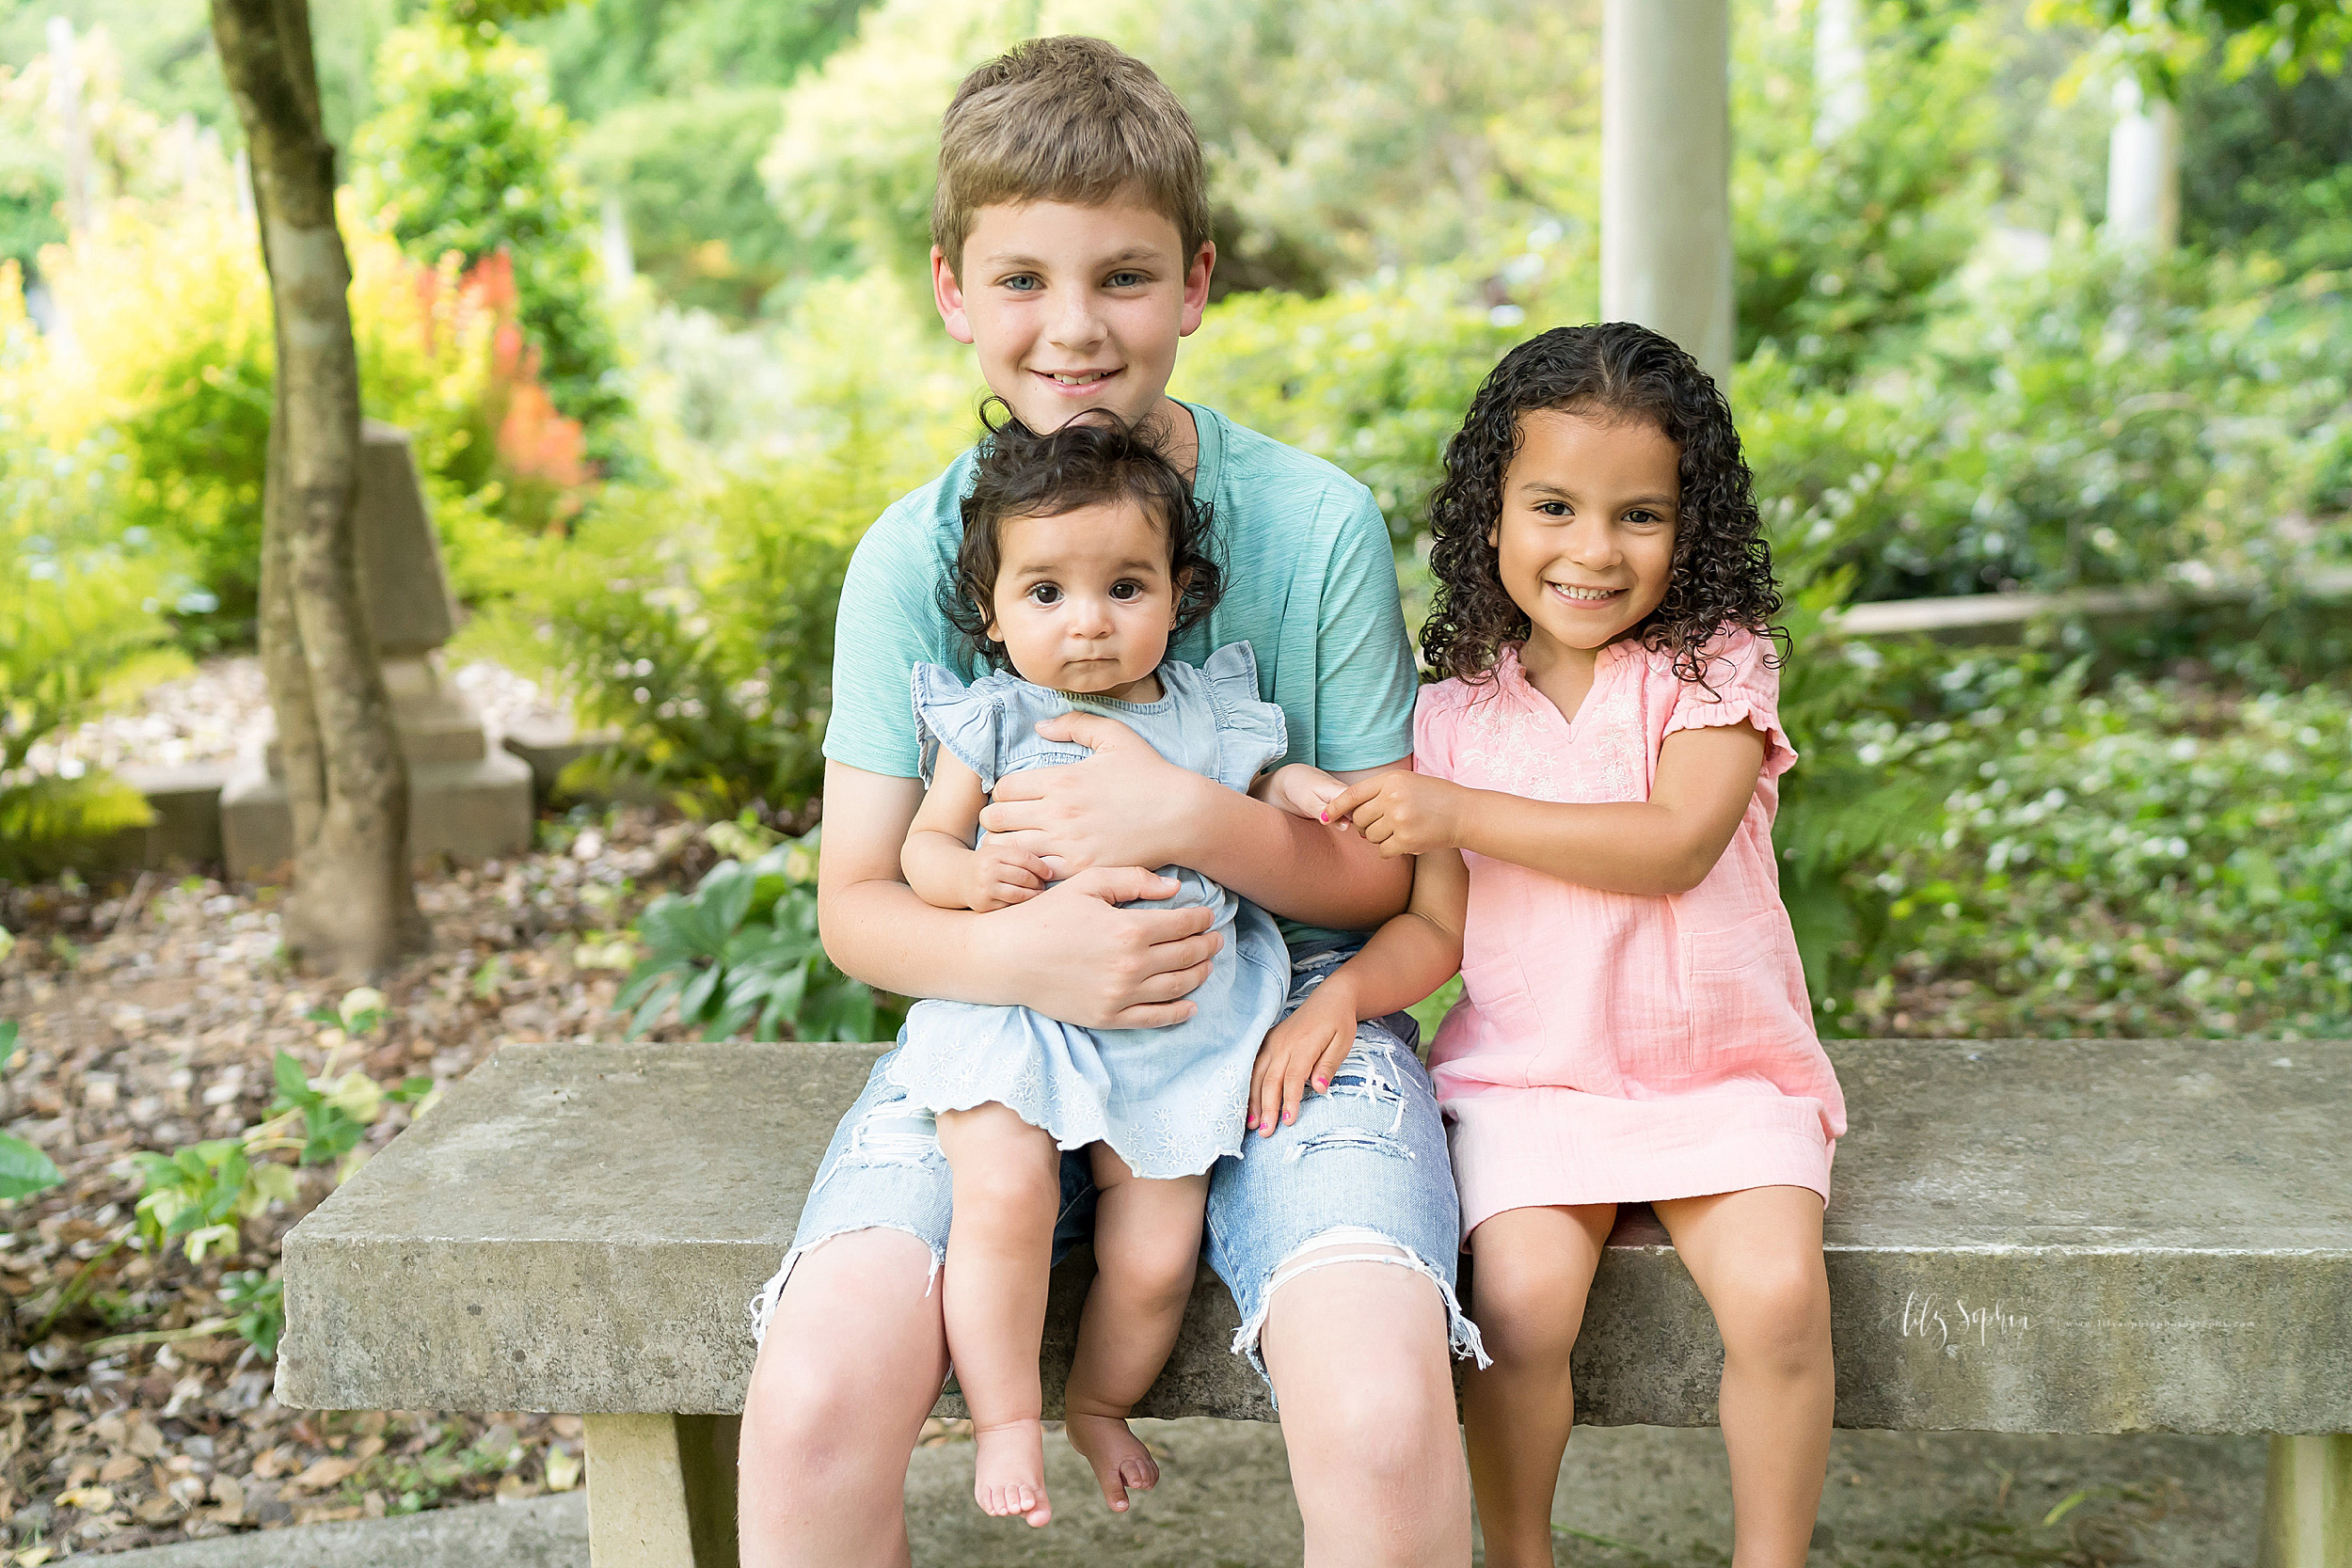  Photo of three happy siblings sitting in an Atlanta garden.  The brother and two sisters are sitting on a cement bench.  The older brother is holding his baby sister on his lap.  His younger sister is sitting next to him and is holding her baby sist